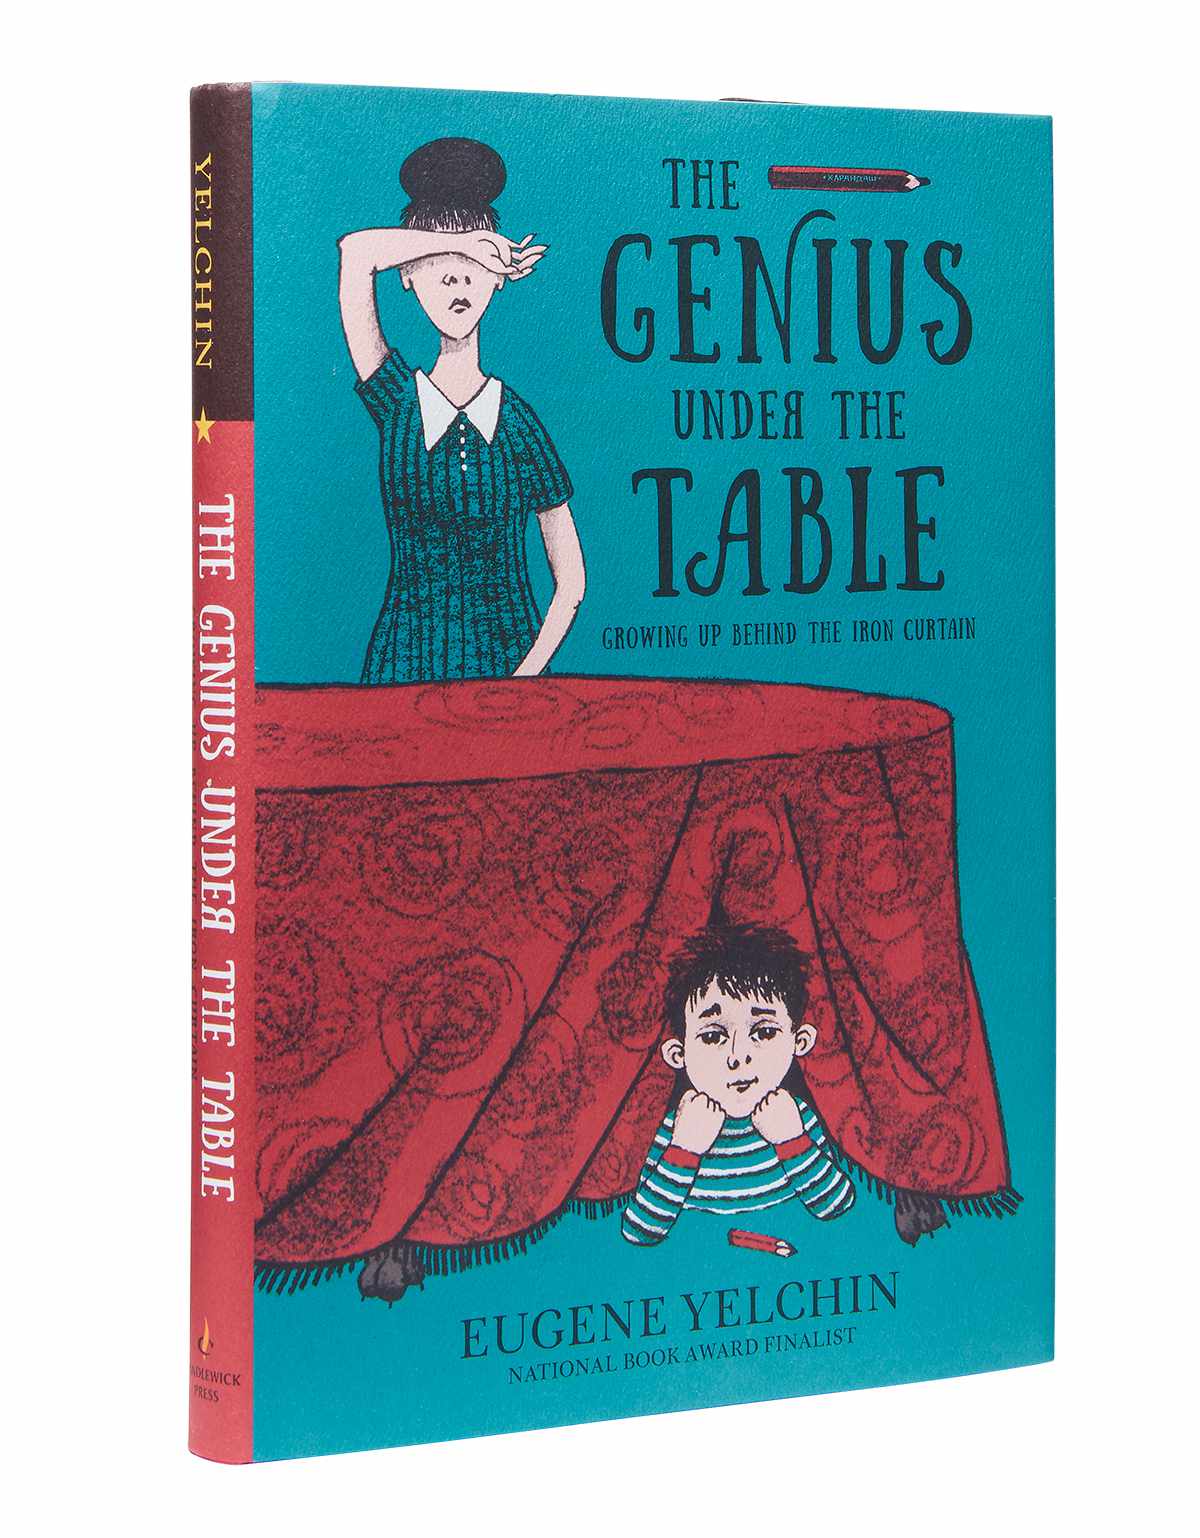 The Genius Under the Table by Eugene Yelchin